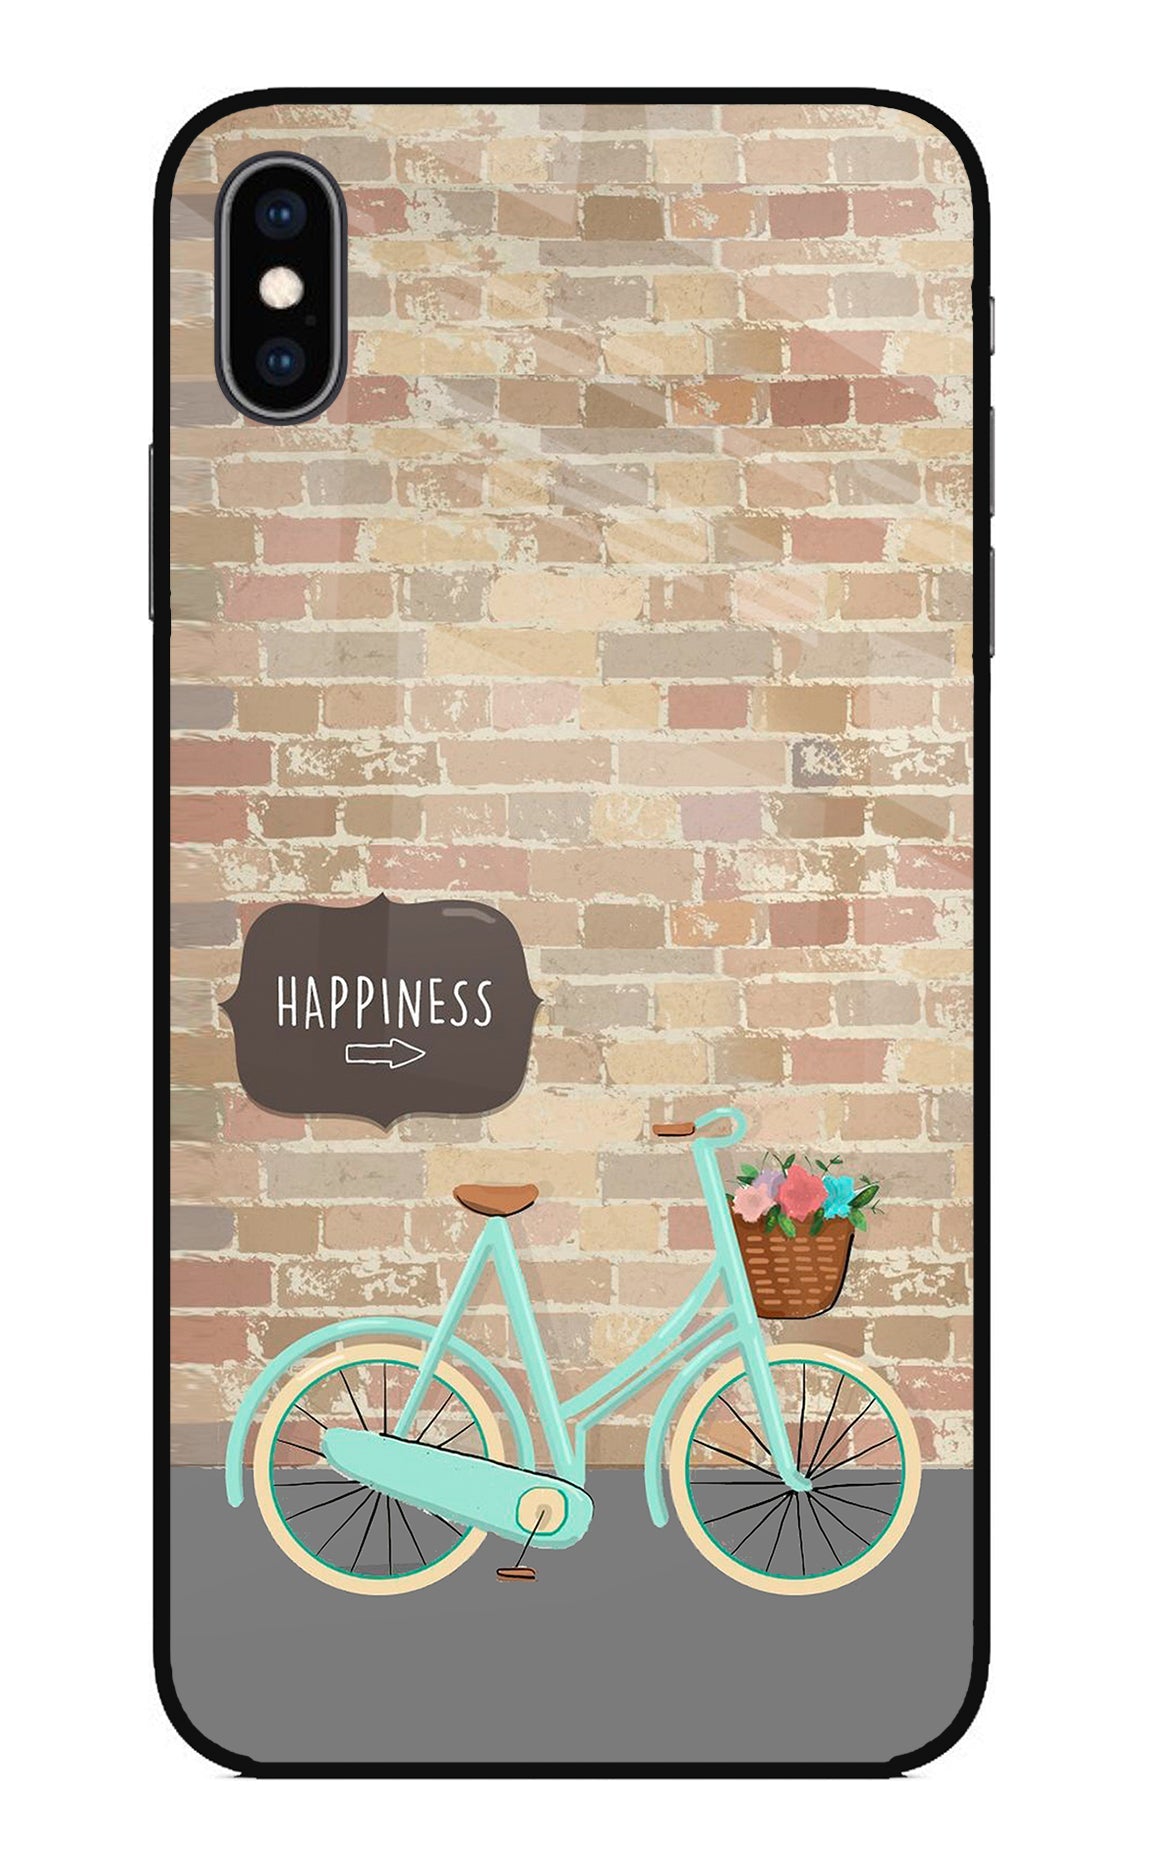 Happiness Artwork iPhone XS Max Glass Case